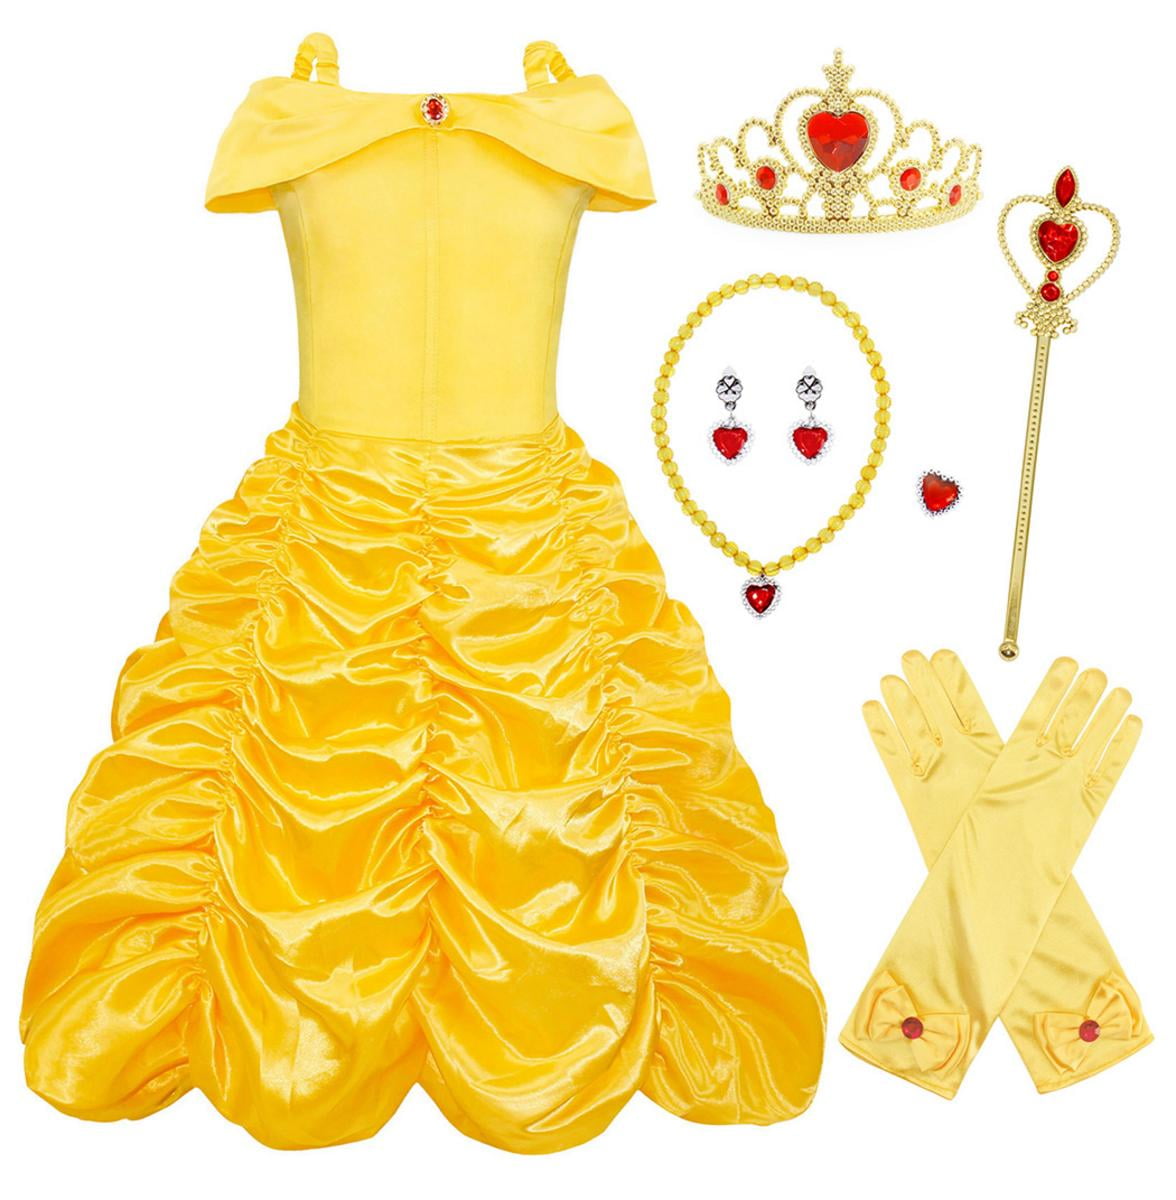 Emma's (“Belle's) yellow gown from Beauty and the Beast: A Costume Study –  Aria Couture